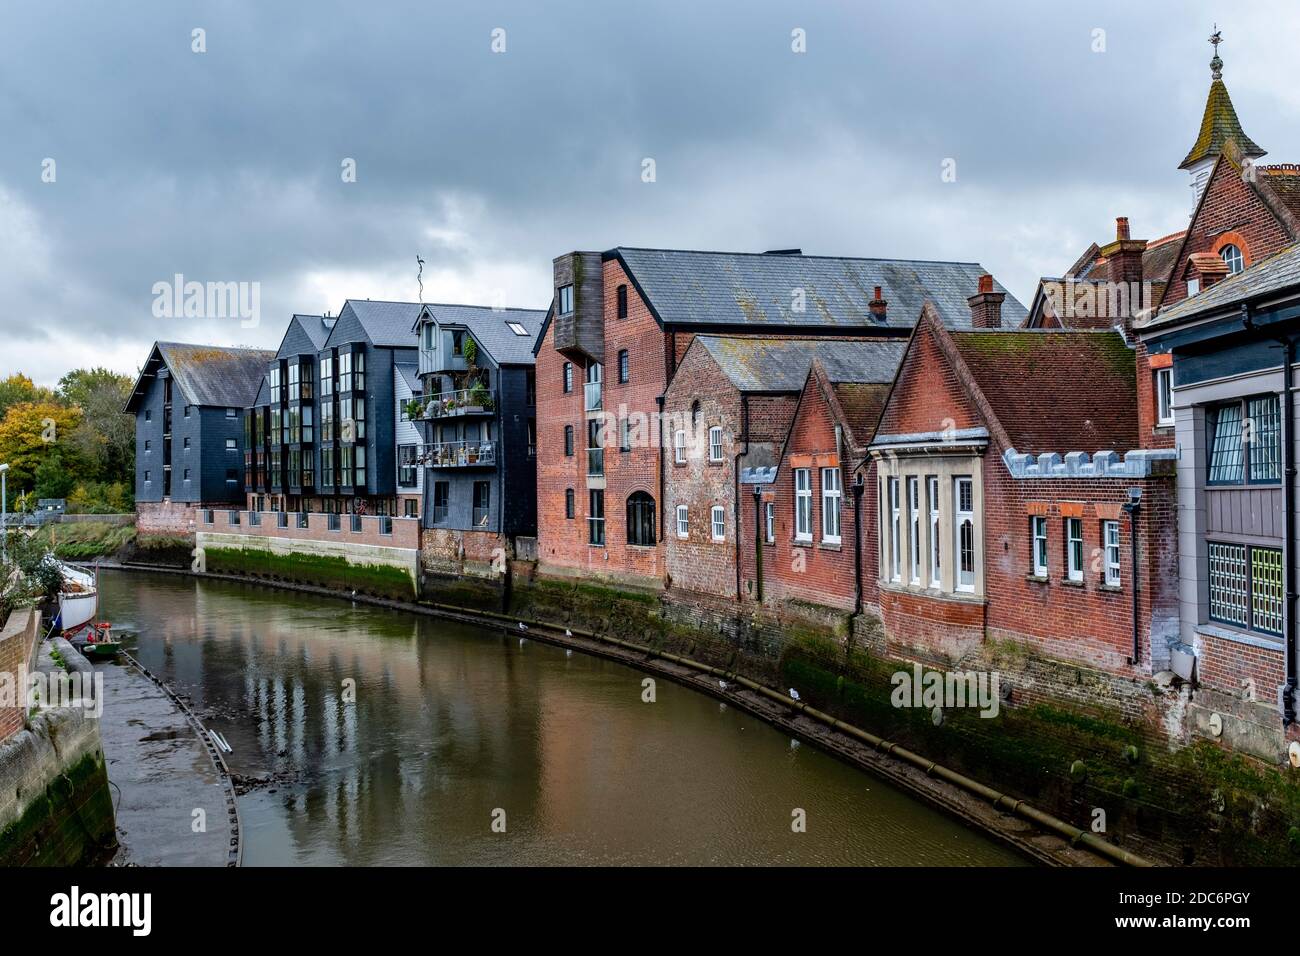 Riverside Buildings In Lewes, East Sussex, UK, Photographed During A Low Tide Of The River Ouse. Stock Photo